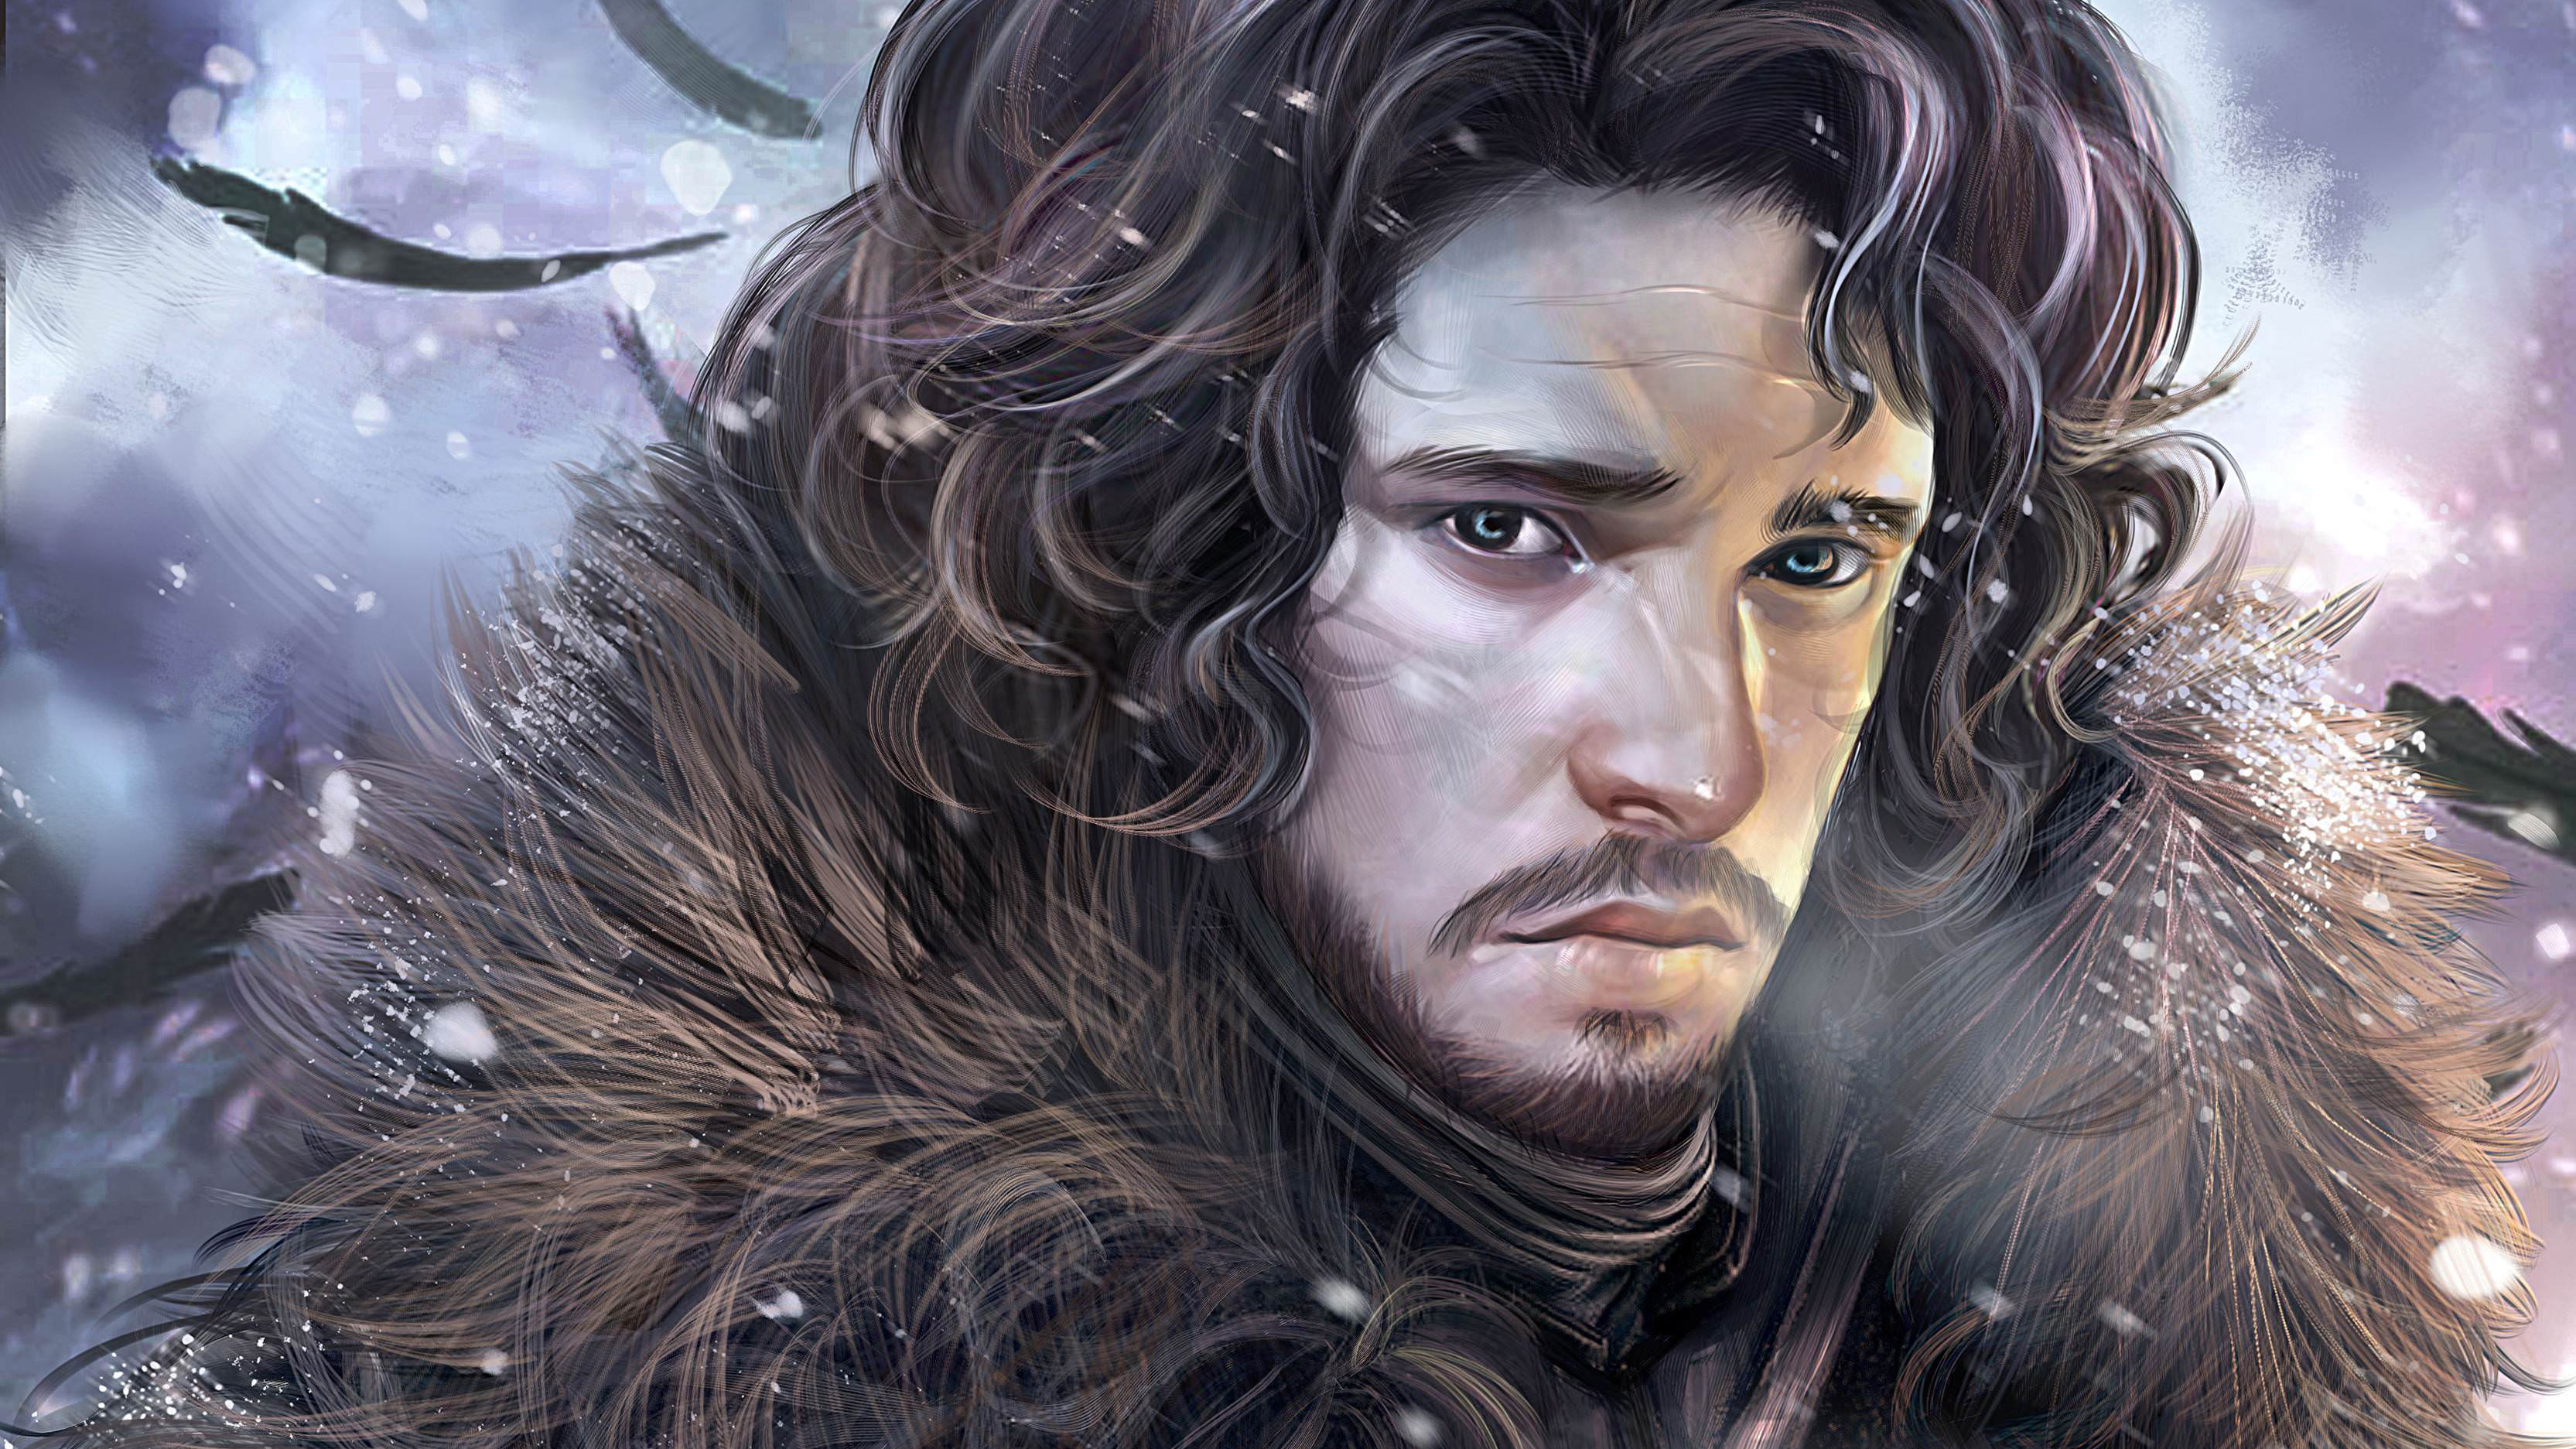 Jon Snow with dragon from Game of thrones Wallpaper 4k Ultra HD ID4921